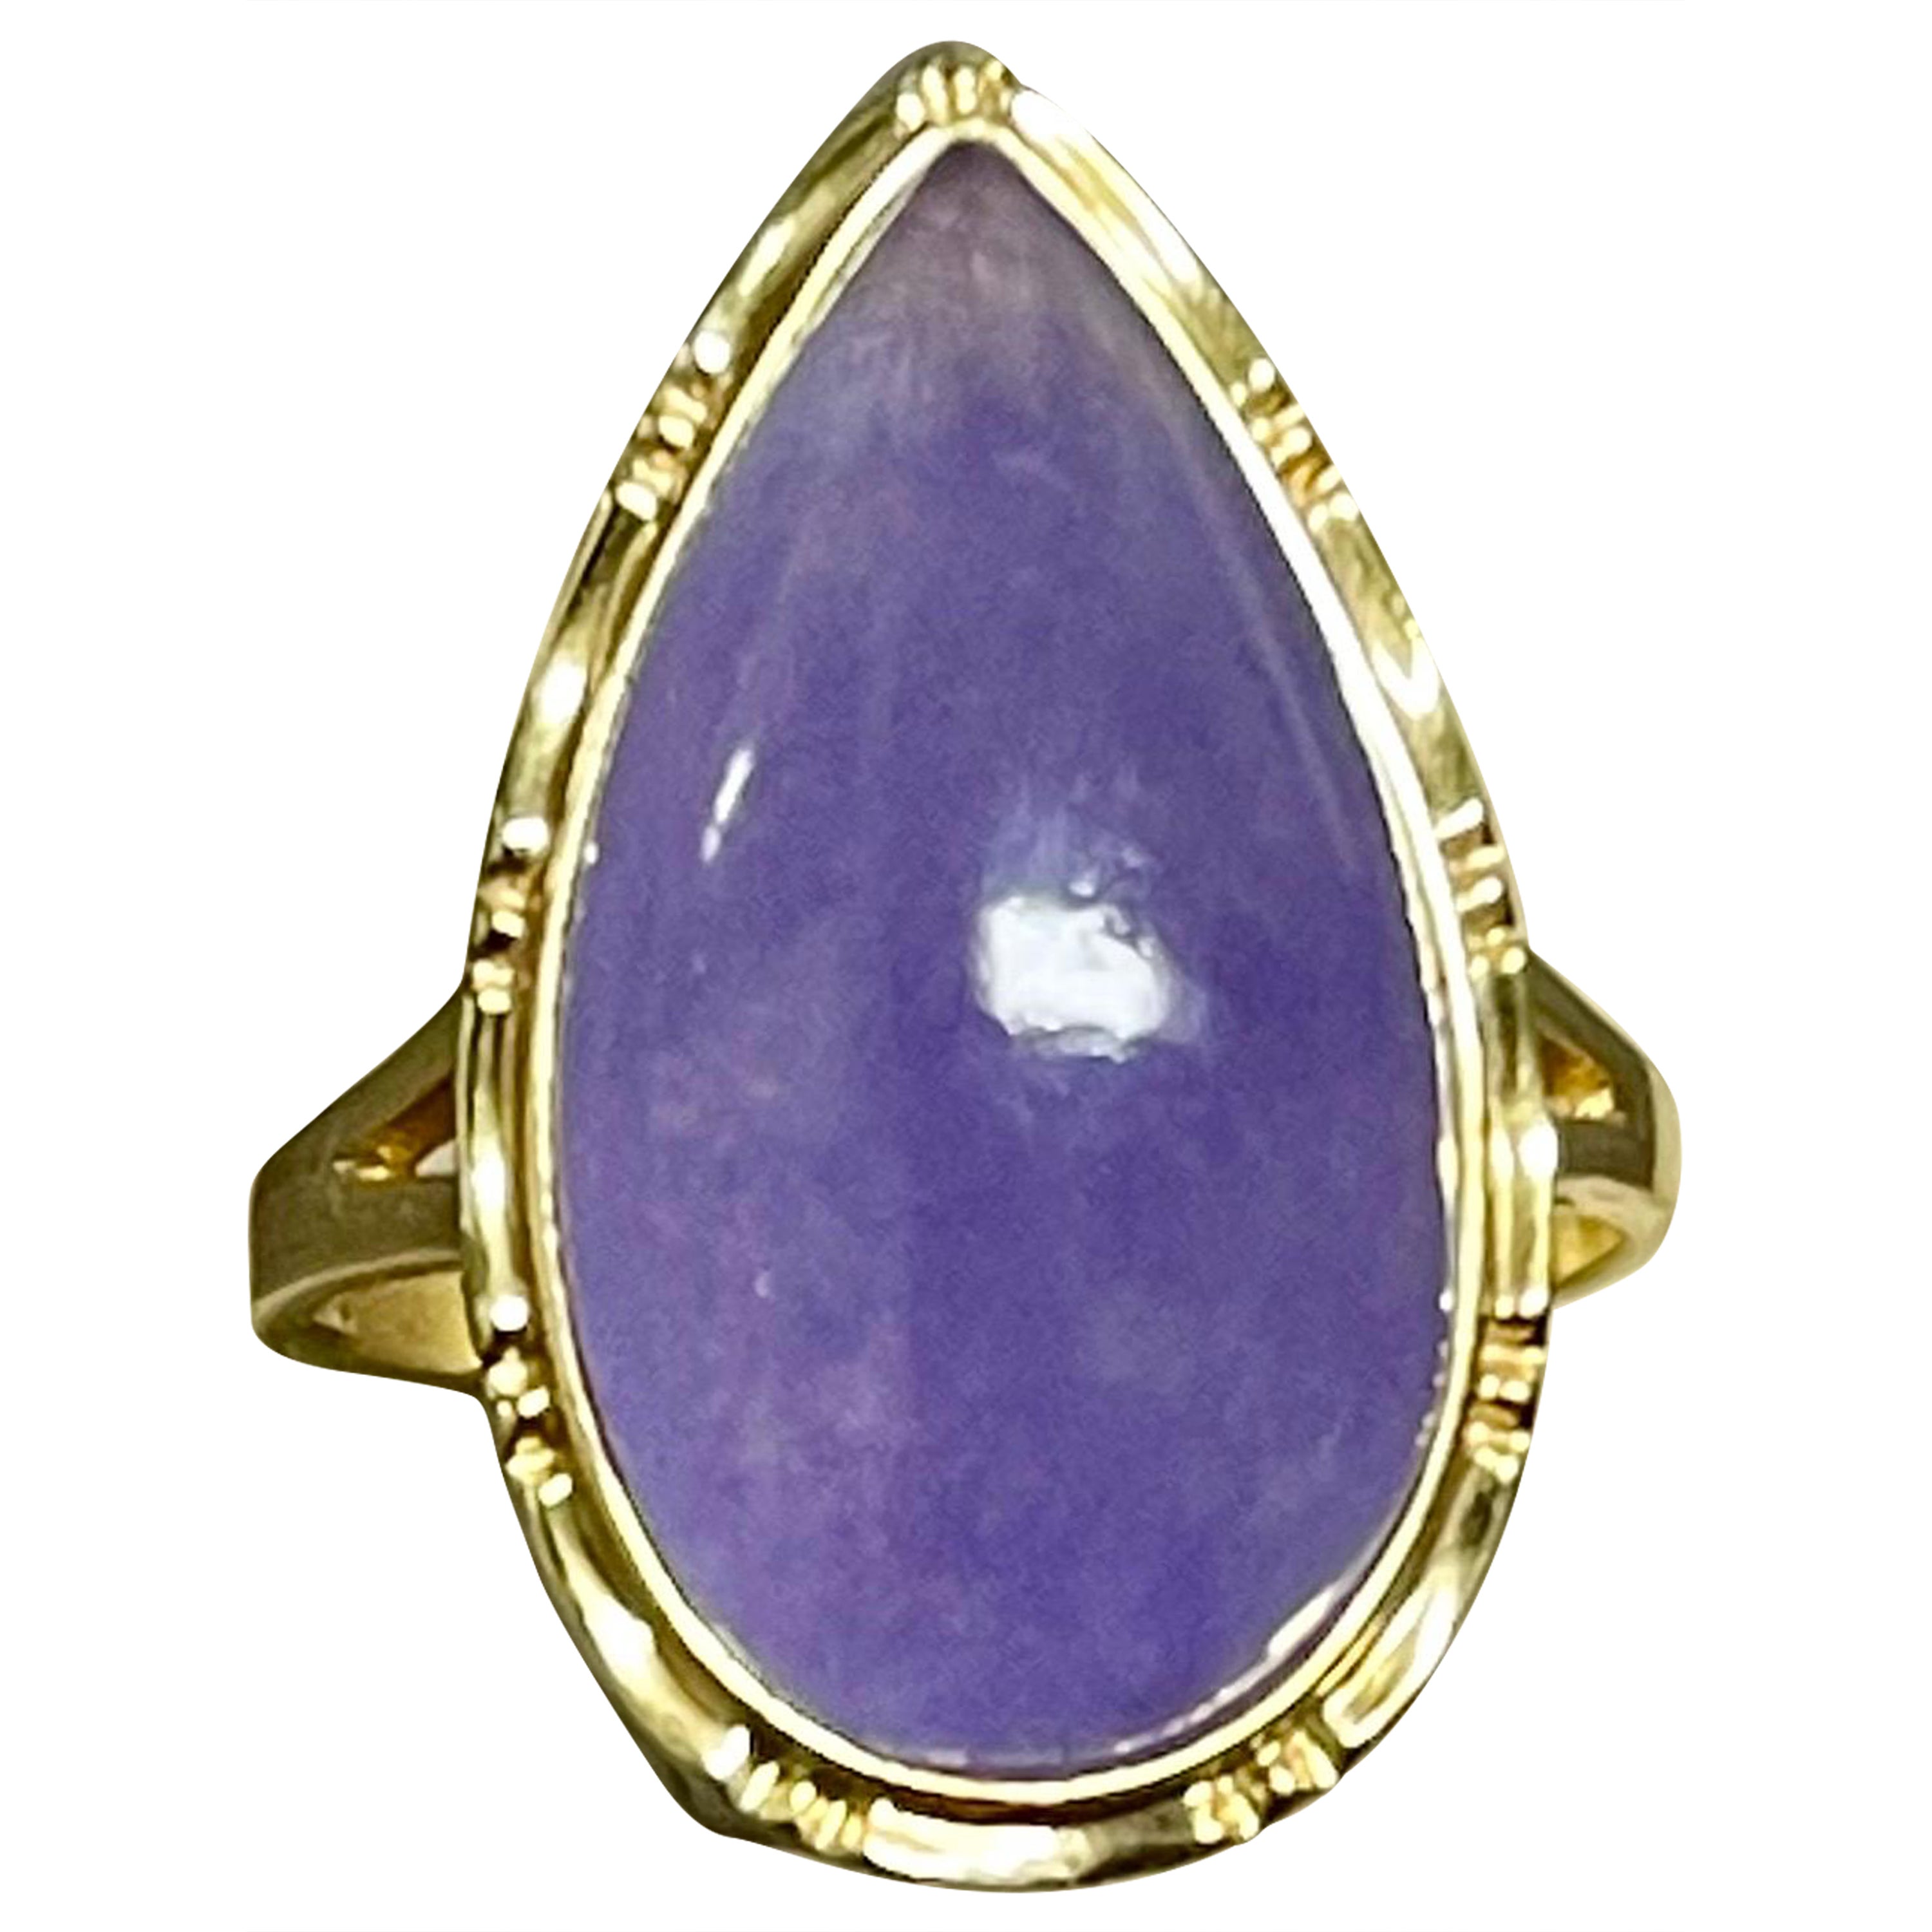 Amazing Pear Shaped Cabochon Amethyst Ring In 14k For Sale